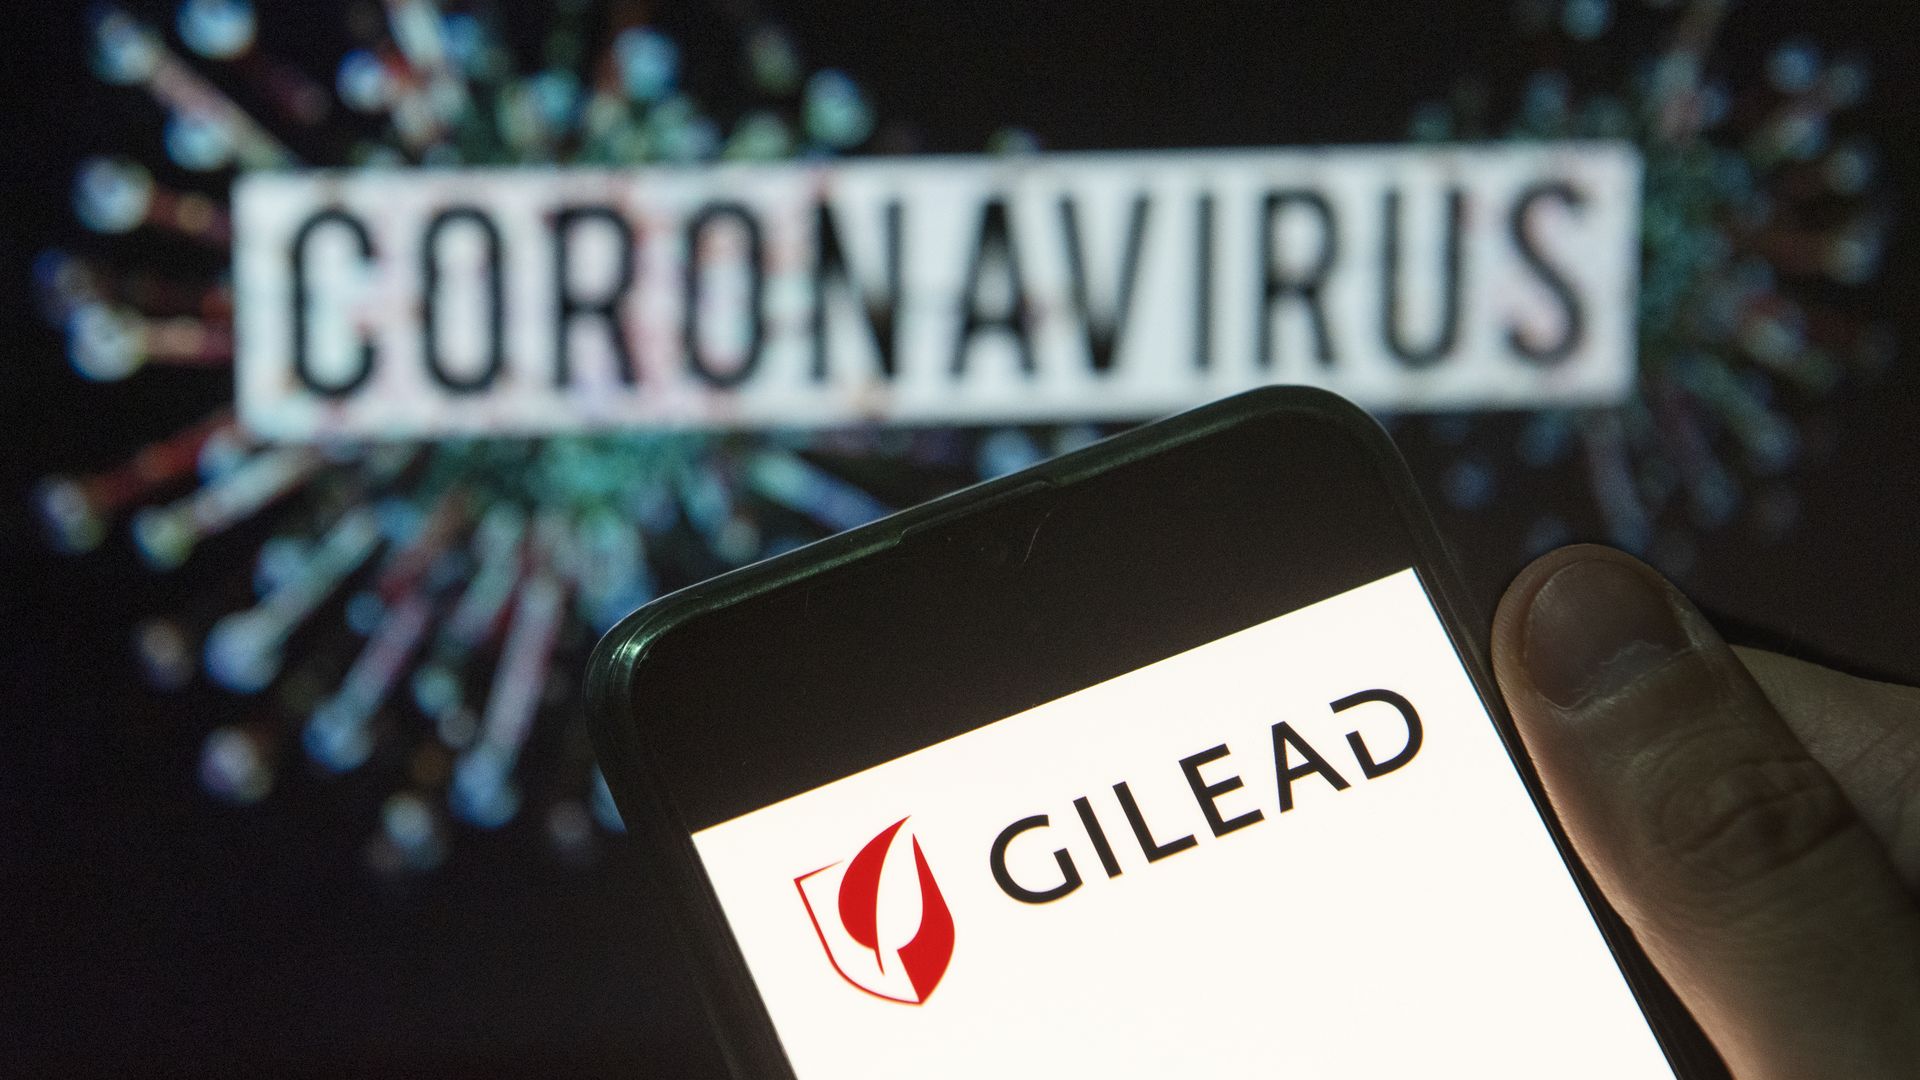 Gilead Science logo on a phone with the word "coronavirus" in the background